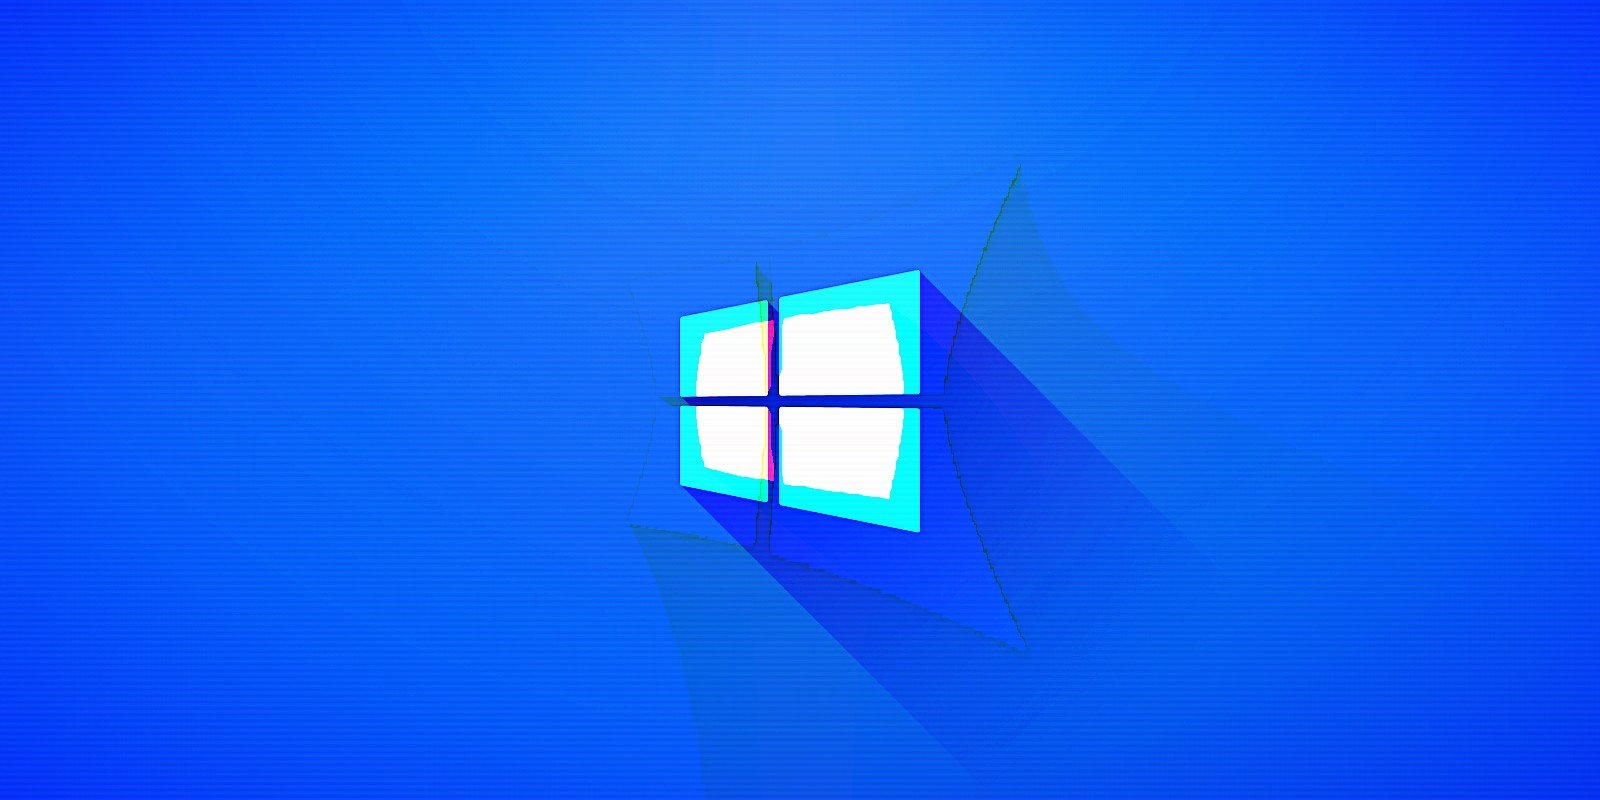 Home windows 10 1809 reaches stop of service next 7 days